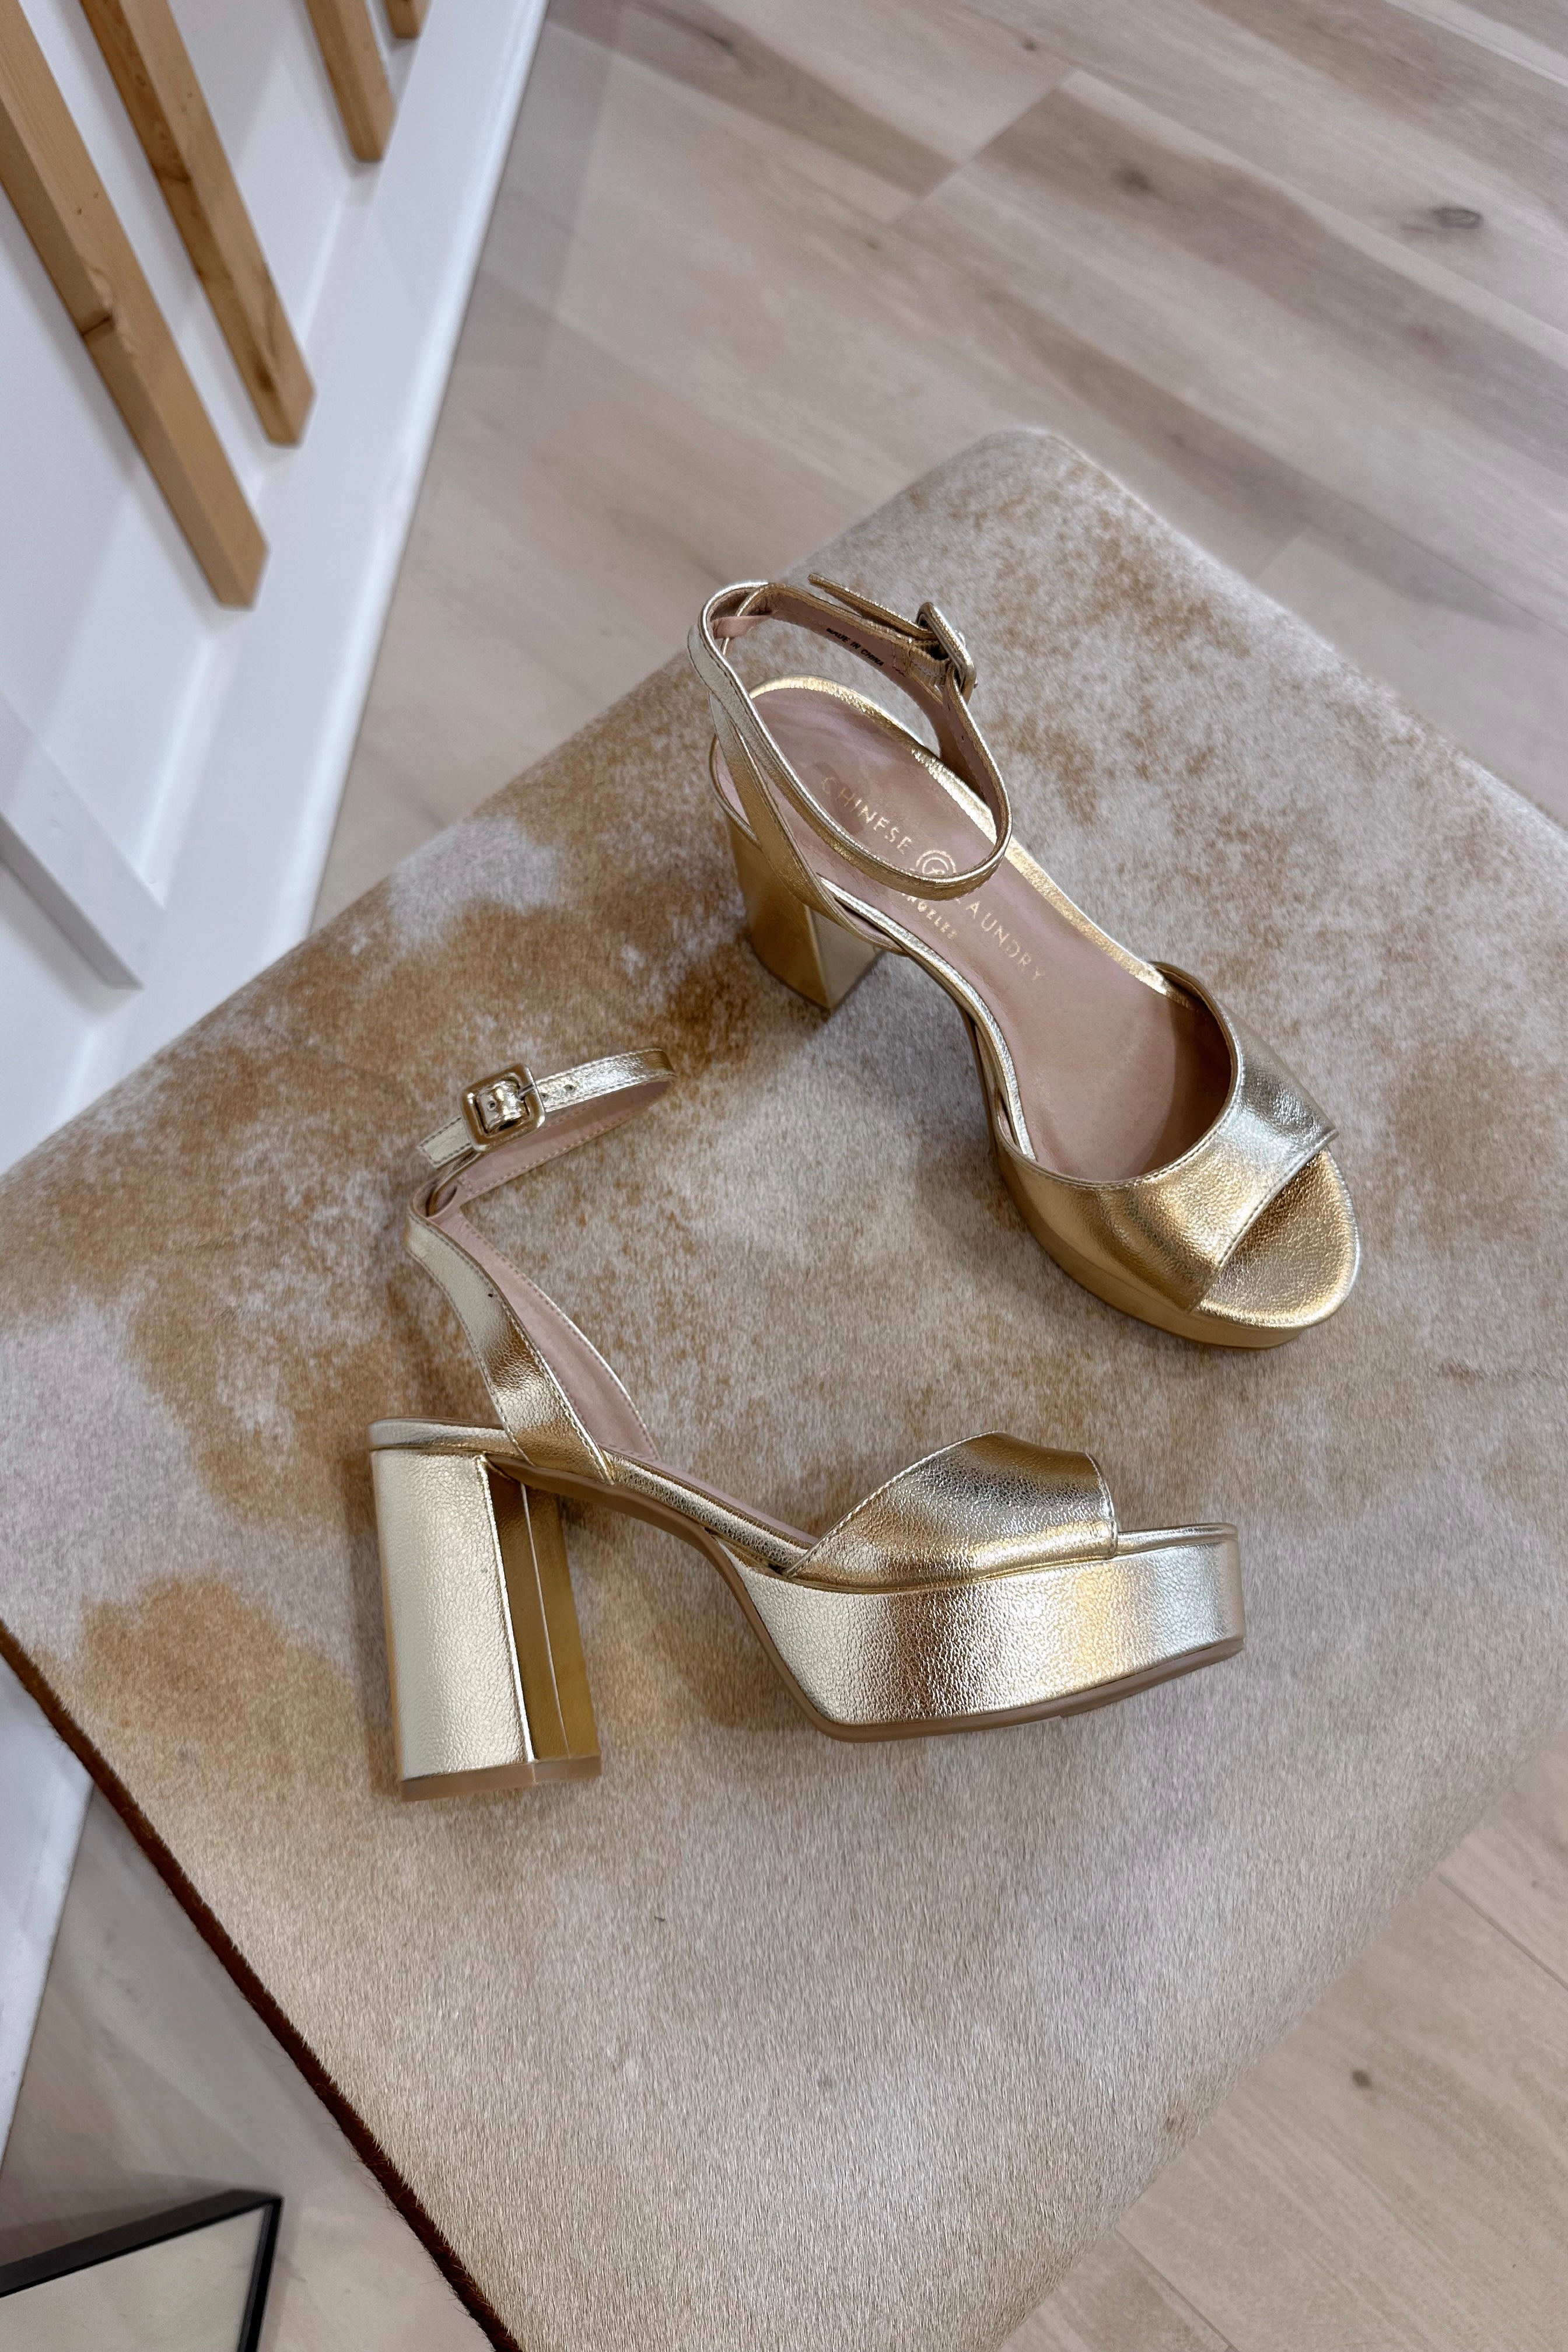 Close up detailed view of the Theresa Platform Heel in Metallic laying on a cow hide stool. The heel features gold metallic faux leather fabric, block heel, round toe, platform sole and adjustable strap.